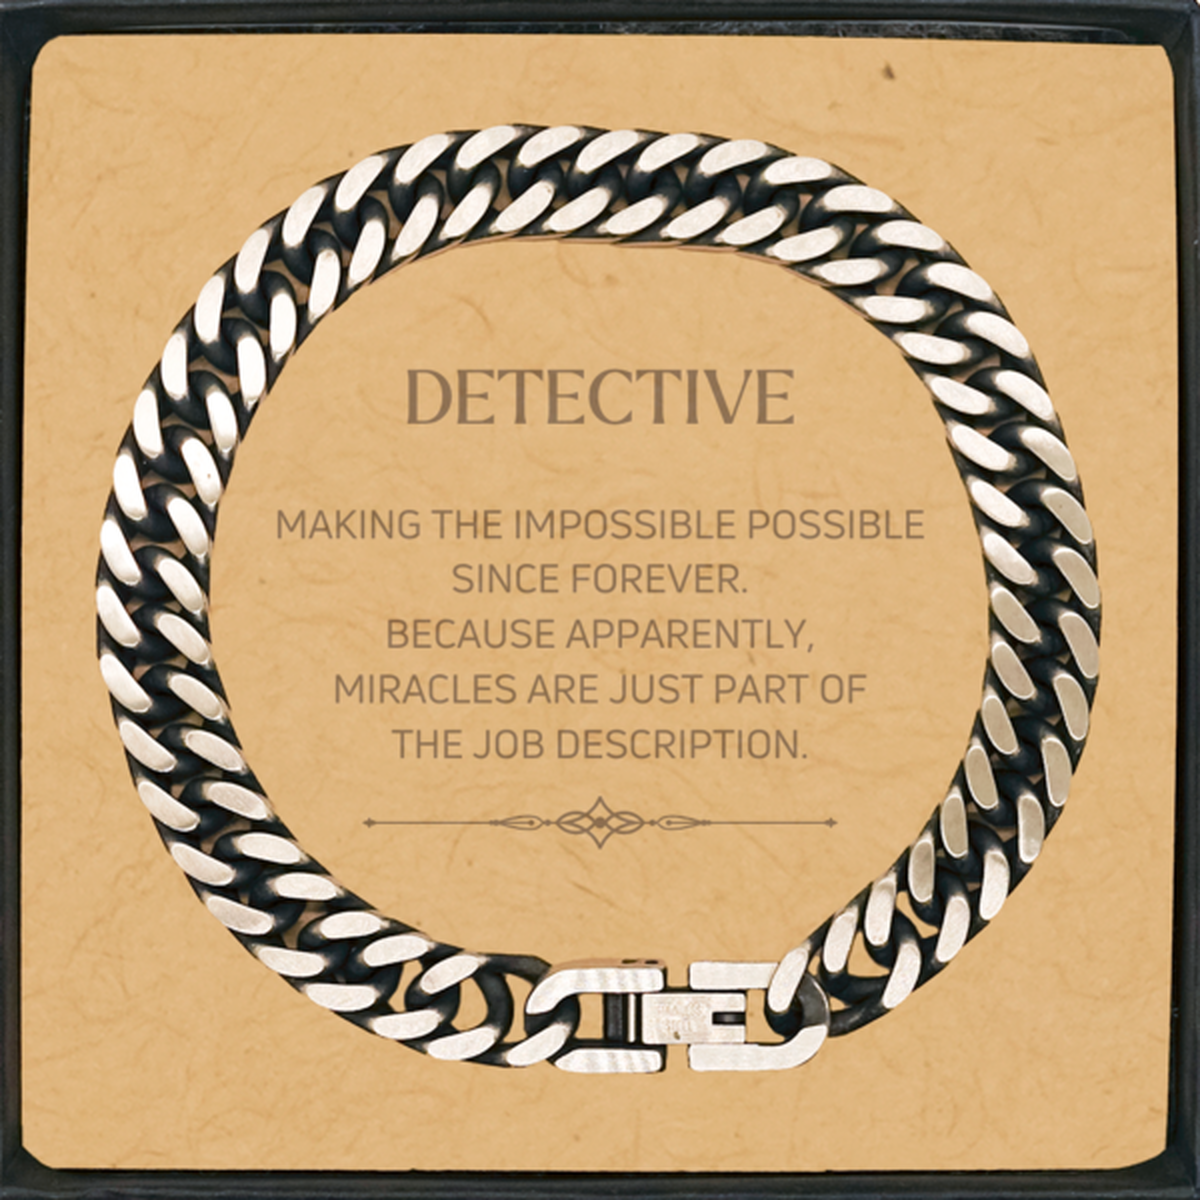 Funny Detective Gifts, Miracles are just part of the job description, Inspirational Birthday Cuban Link Chain Bracelet For Detective, Men, Women, Coworkers, Friends, Boss